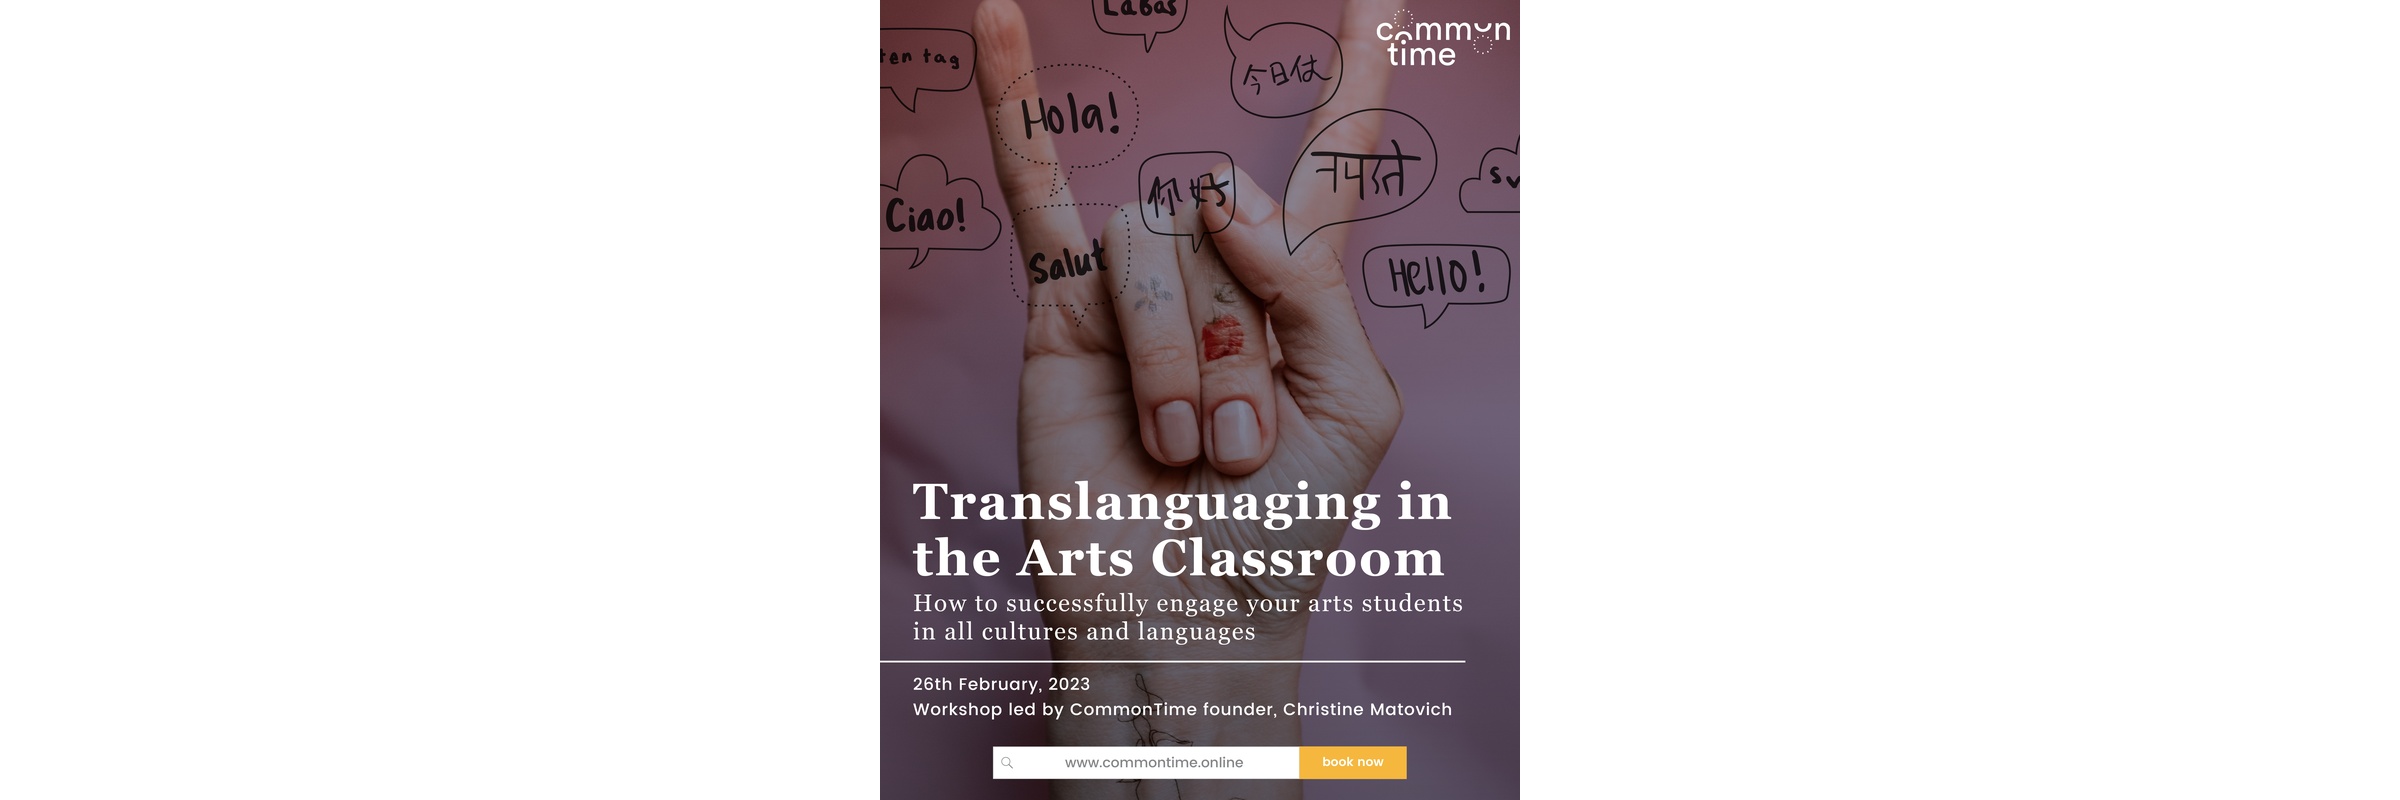 CommonTime - Translanguaging in the Arts Classroom